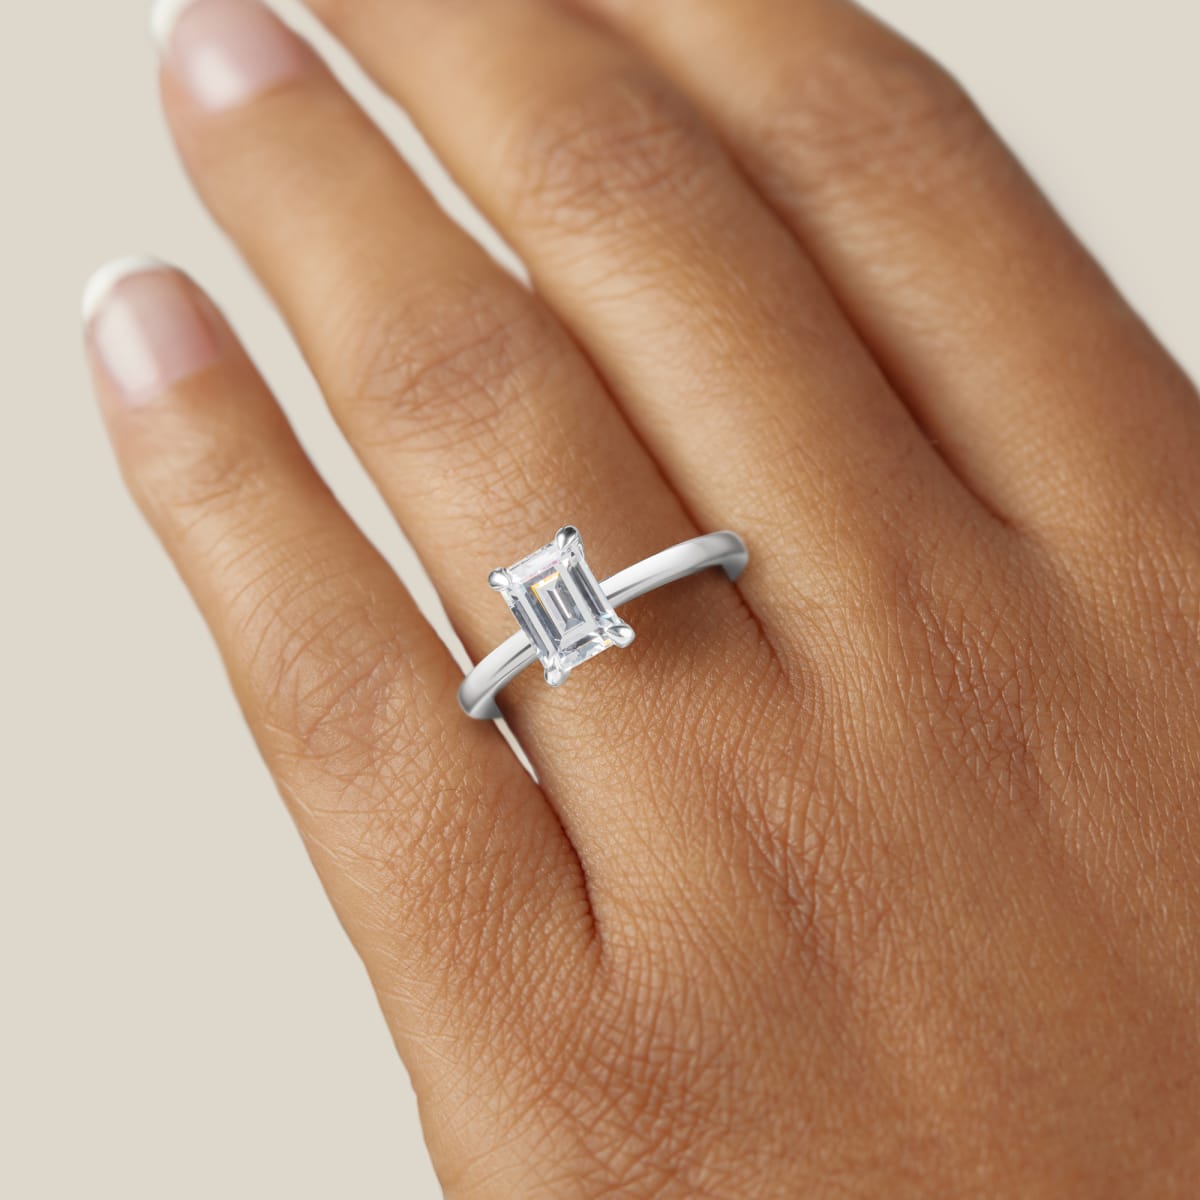 1 Carat Emerald Cut Cubic Zirconia Cathedral Solitaire Engagement Ring in  14K White Gold